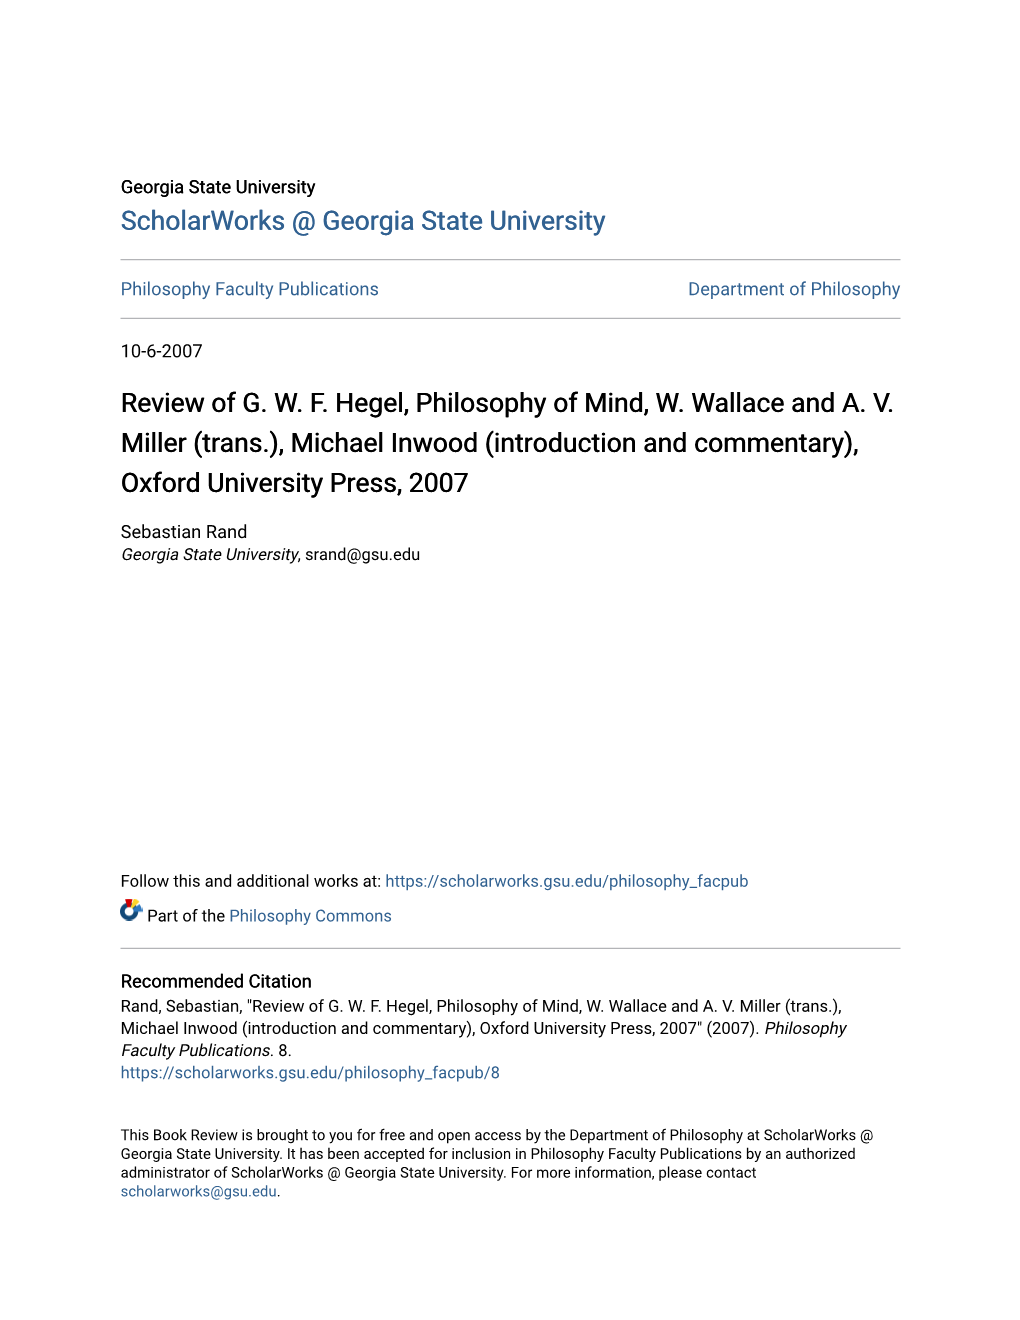 Review of GWF Hegel, Philosophy of Mind, W. Wallace and AV Miller